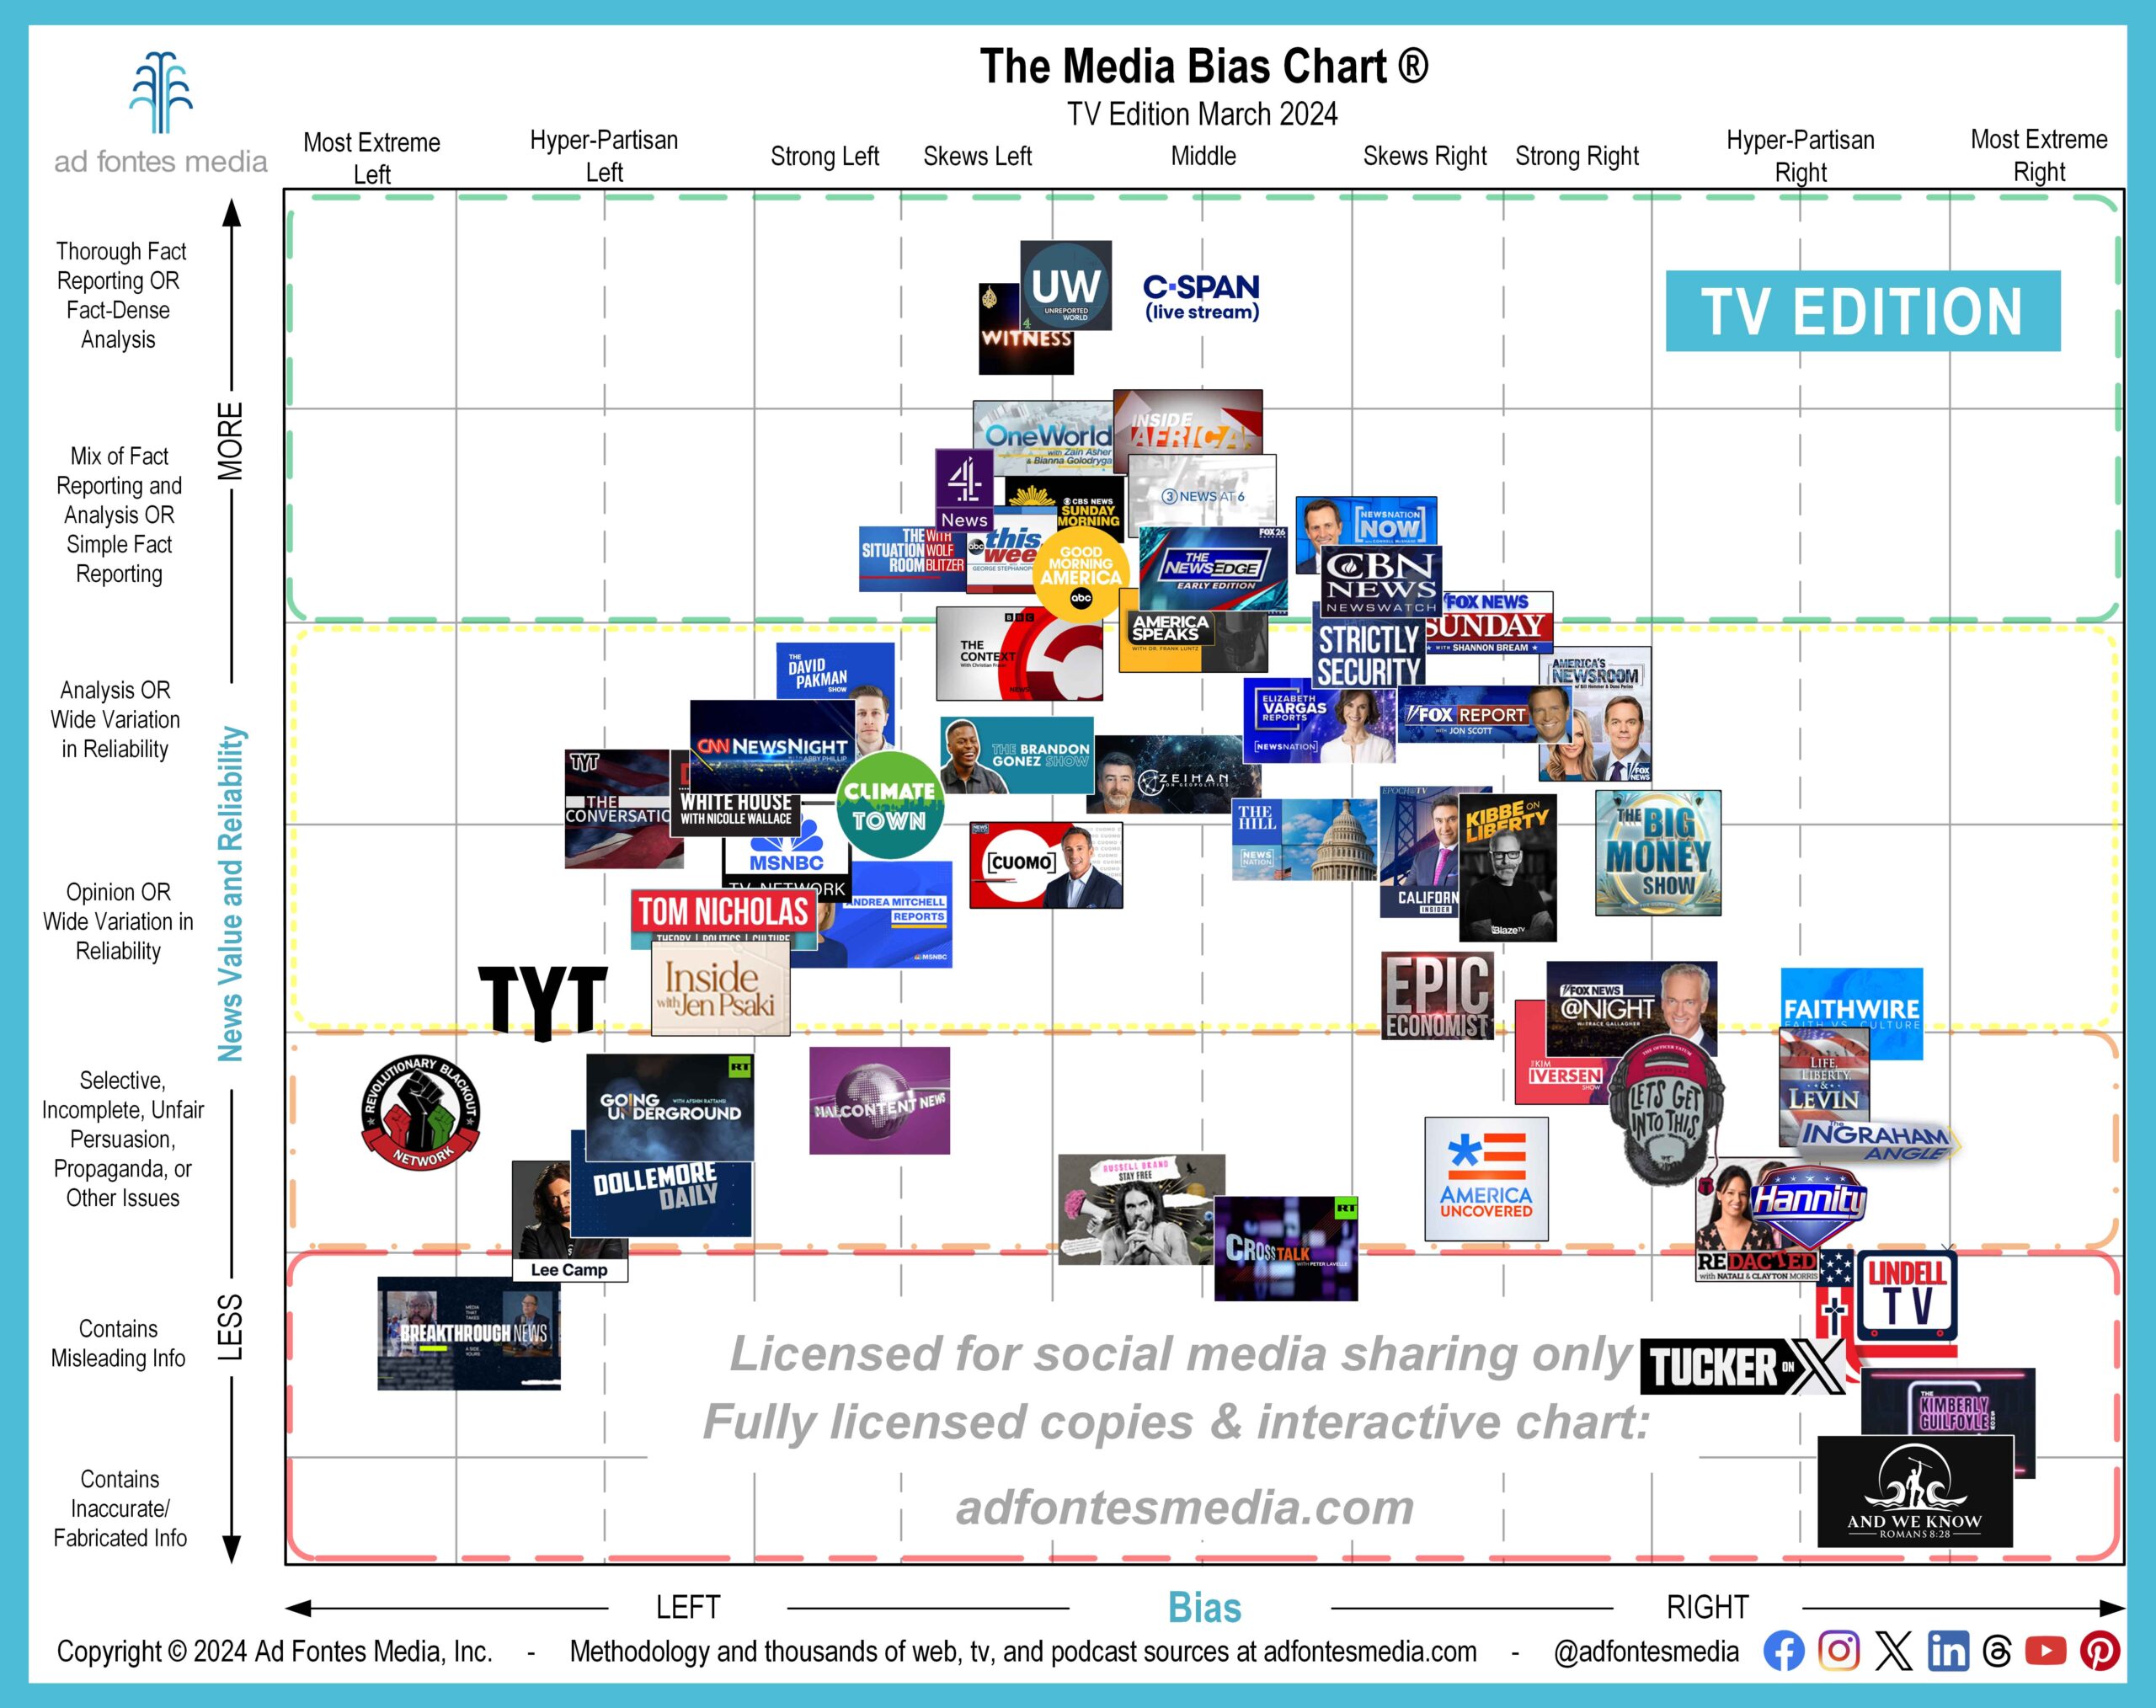 Ad Fontes Media’s monthly TV/video Media Bias Chart includes 60 sources and debuts eight sources, including Tucker on X